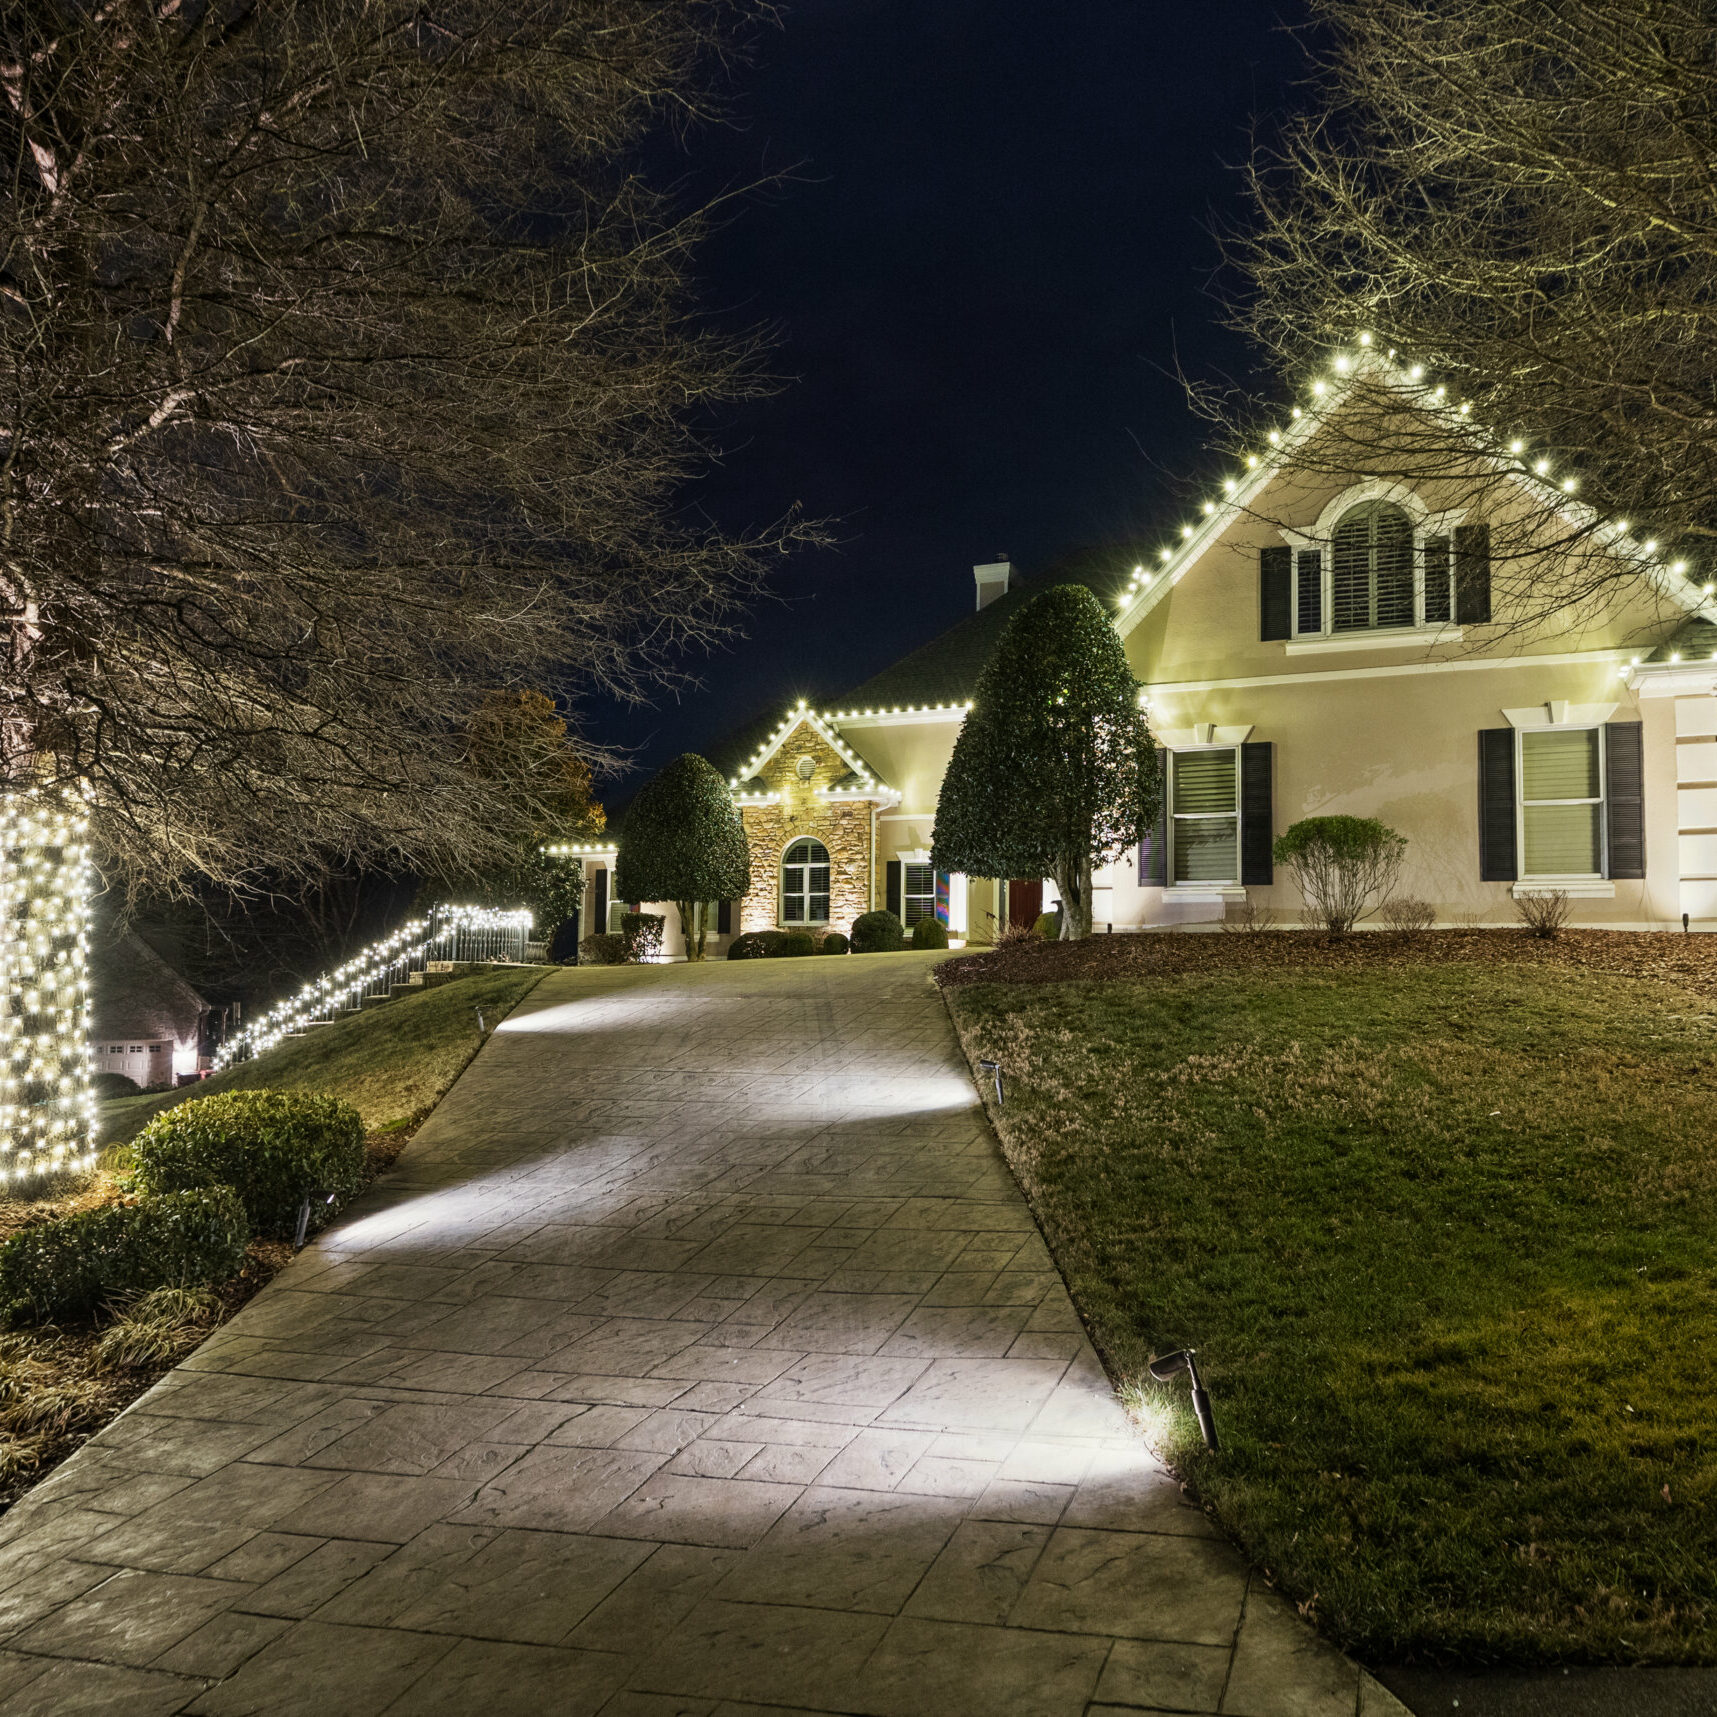 On Christmas night, the house is aglow with festive lights, creating a warm and joyous atmosphere.